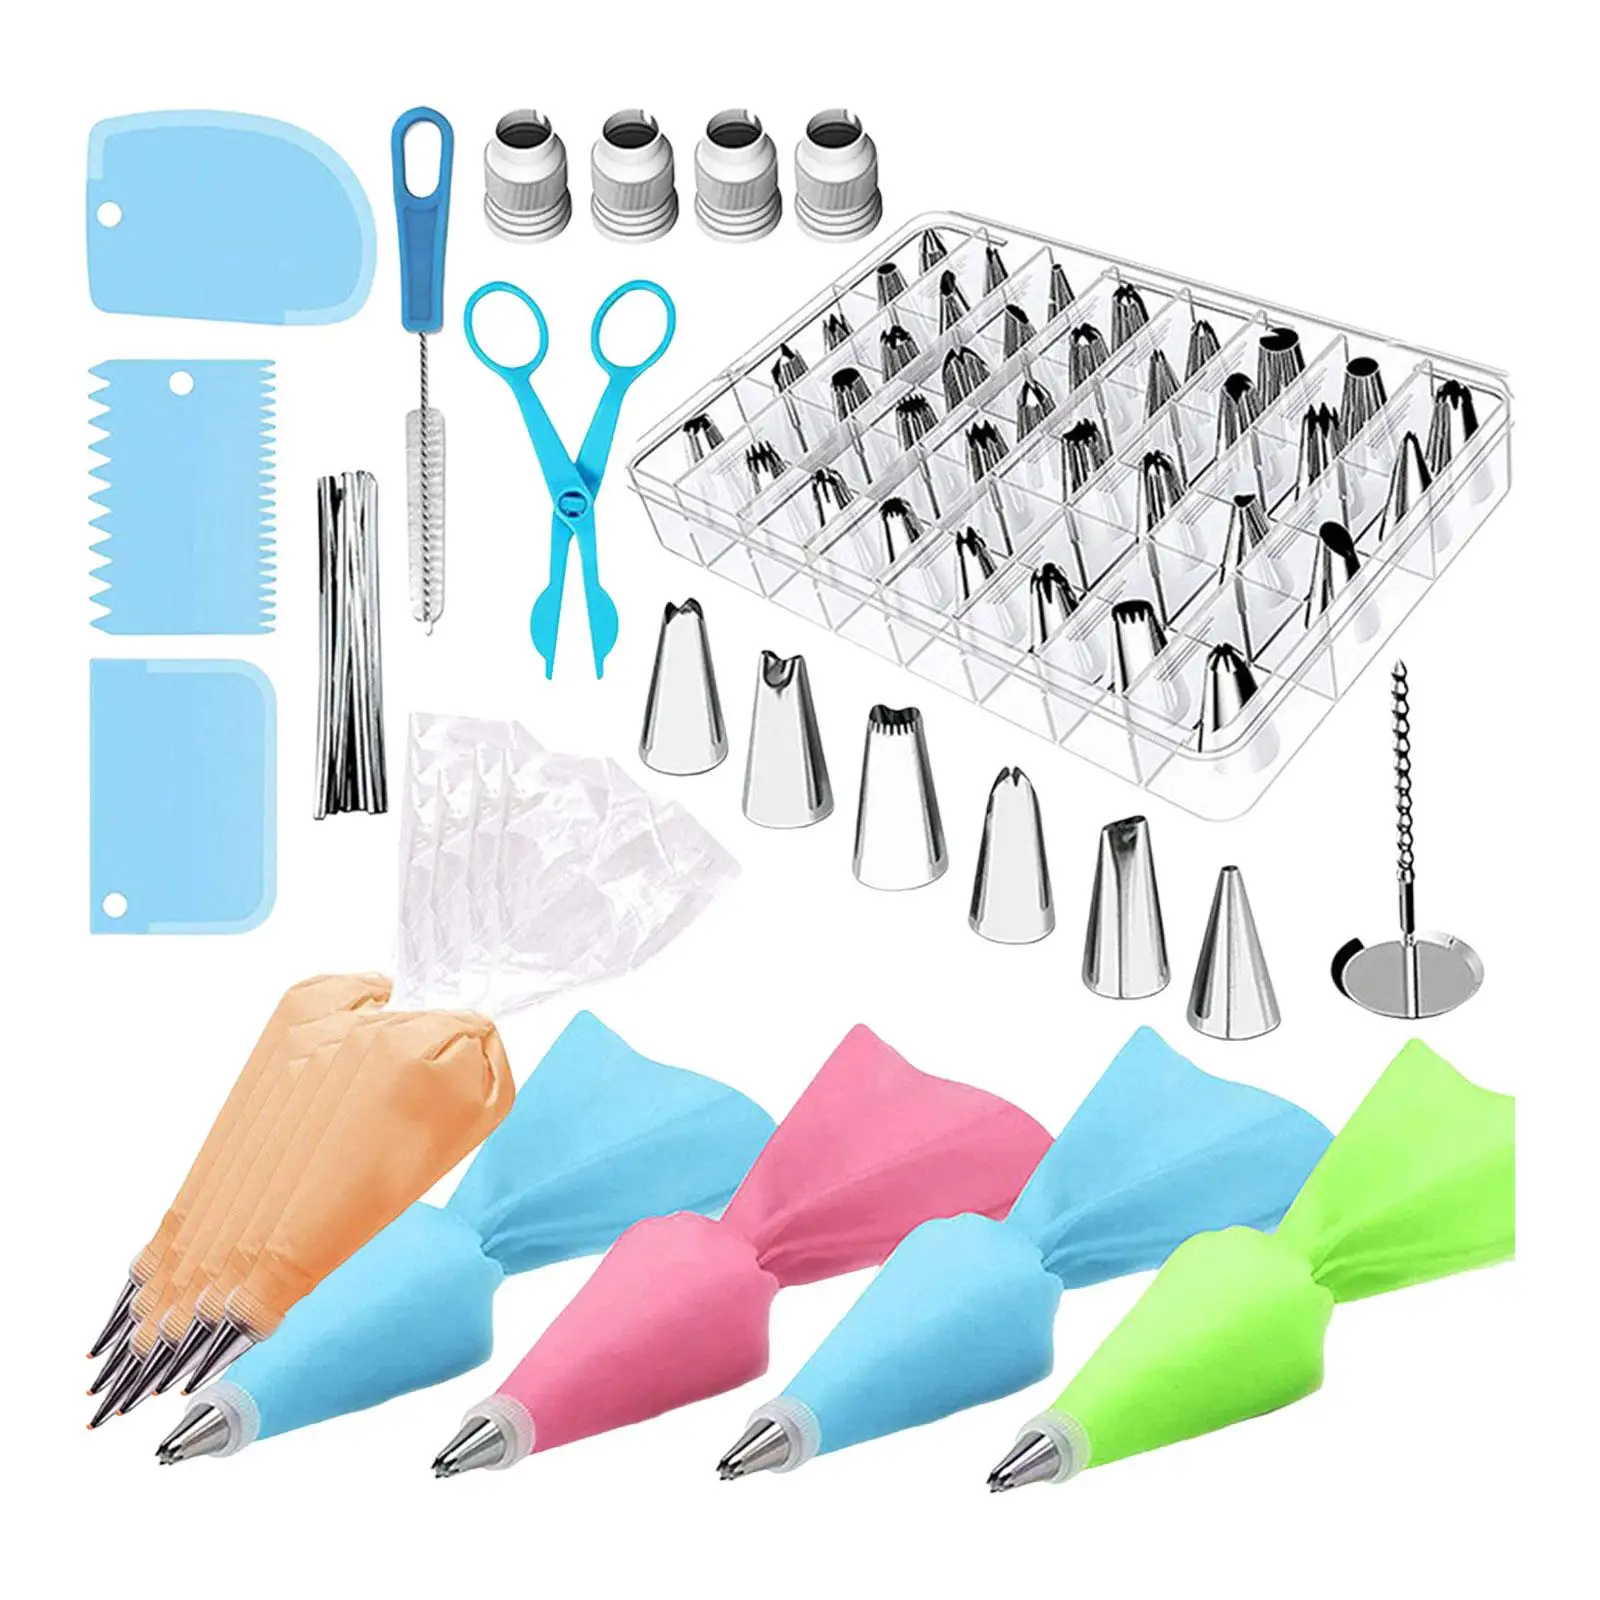 72x Cake Decorating Supplies Cookie Icing Cakes Cupcakes Baking Pastry Tools Cake Cream Frosting Tool Piping Bags and Tips Set